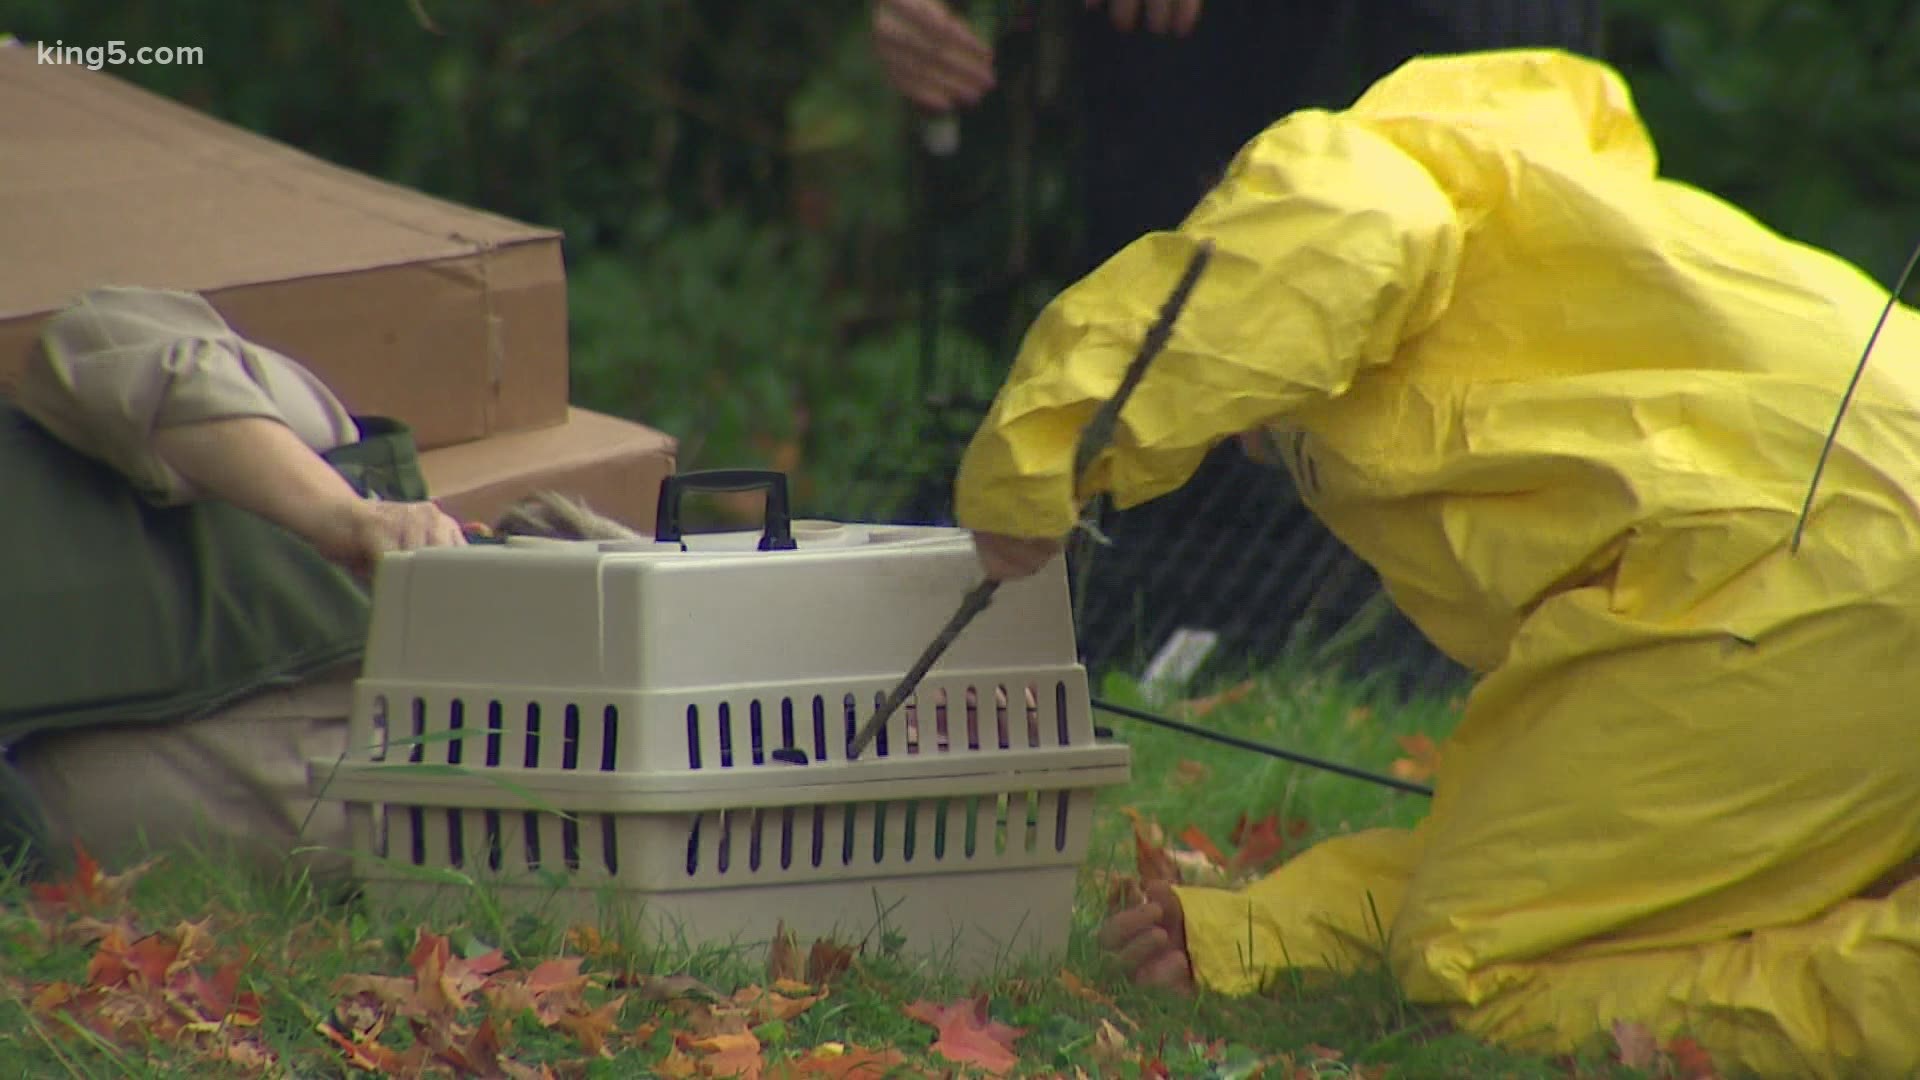 The city discovered more than 200 live animals in the home. Dozens of dead animals were also found on the Seattle property.